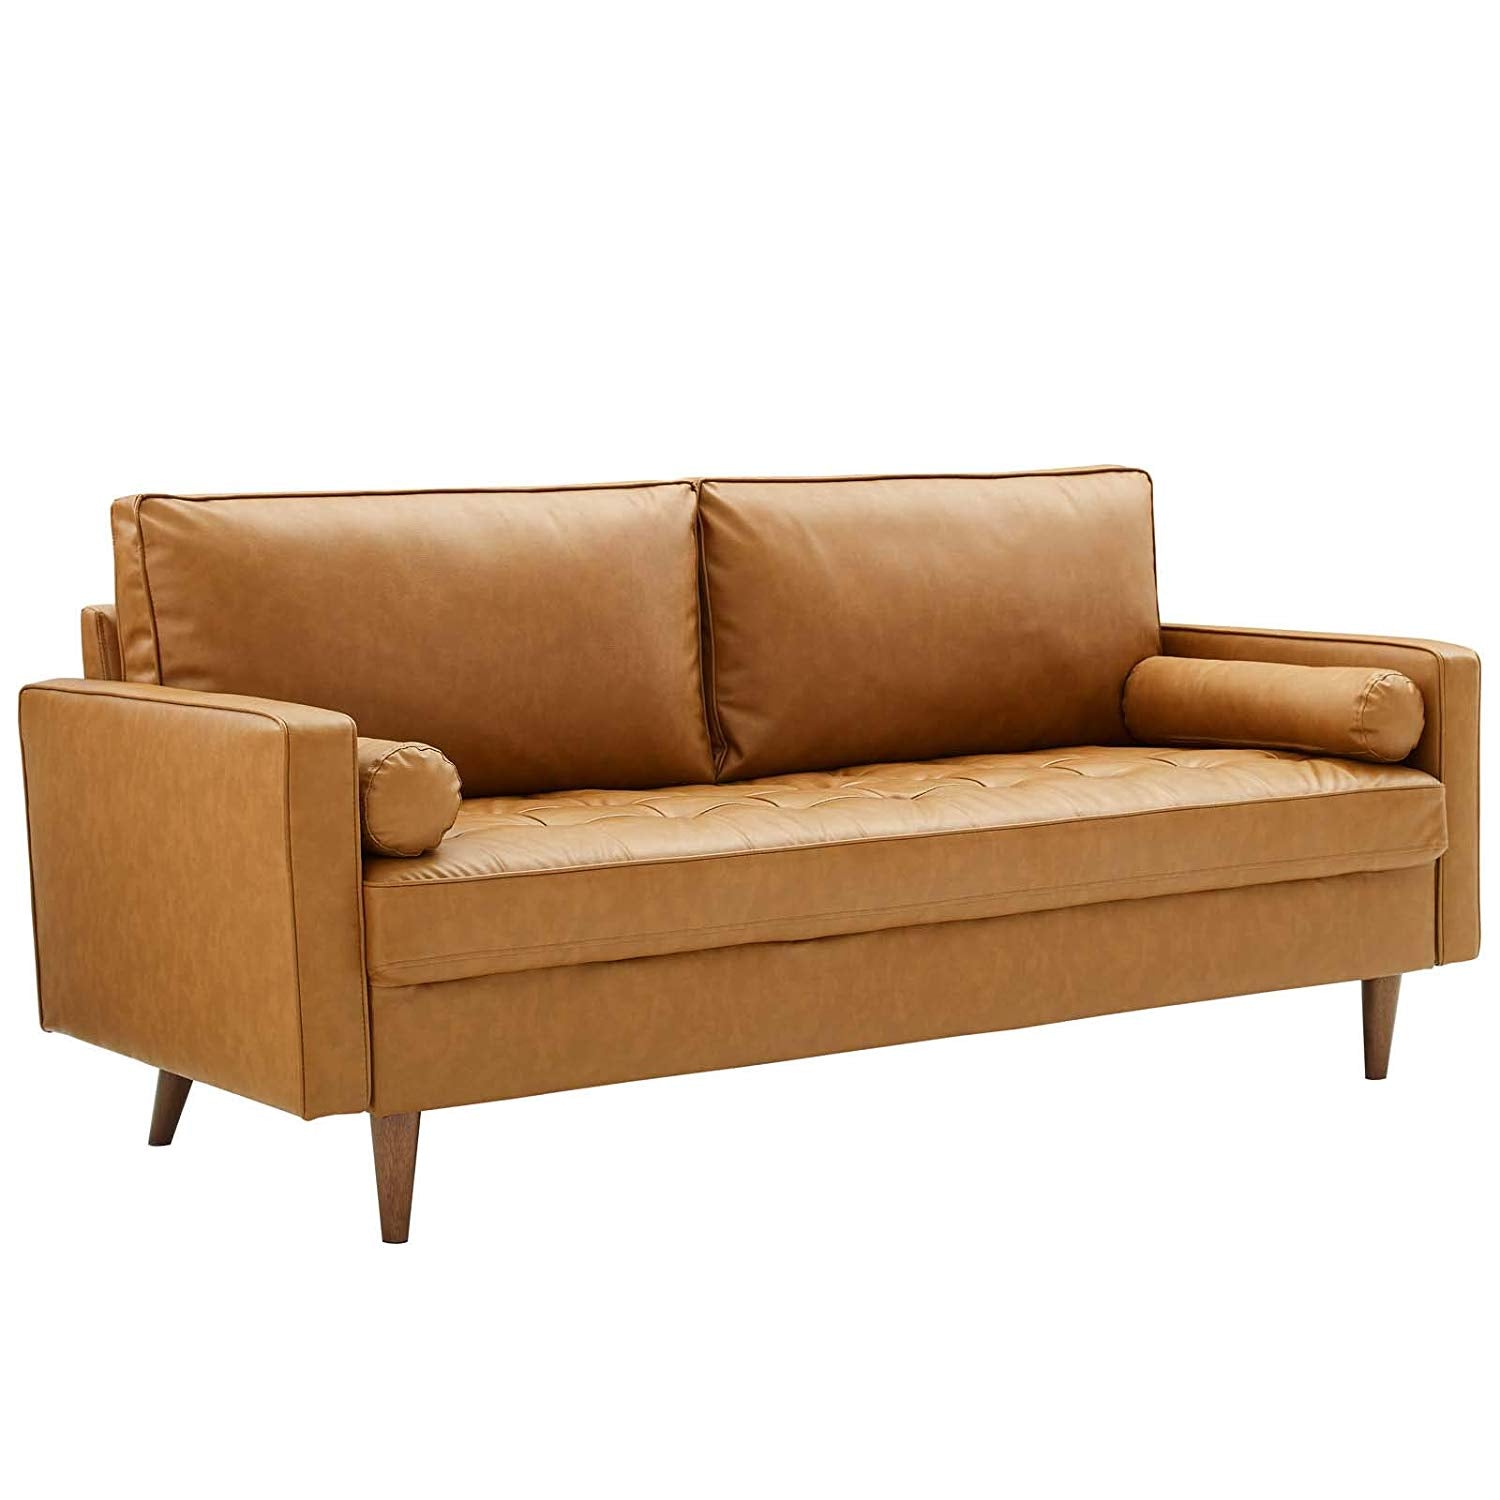 Valiant Upholstered Faux Leather Sofa - living-essentials